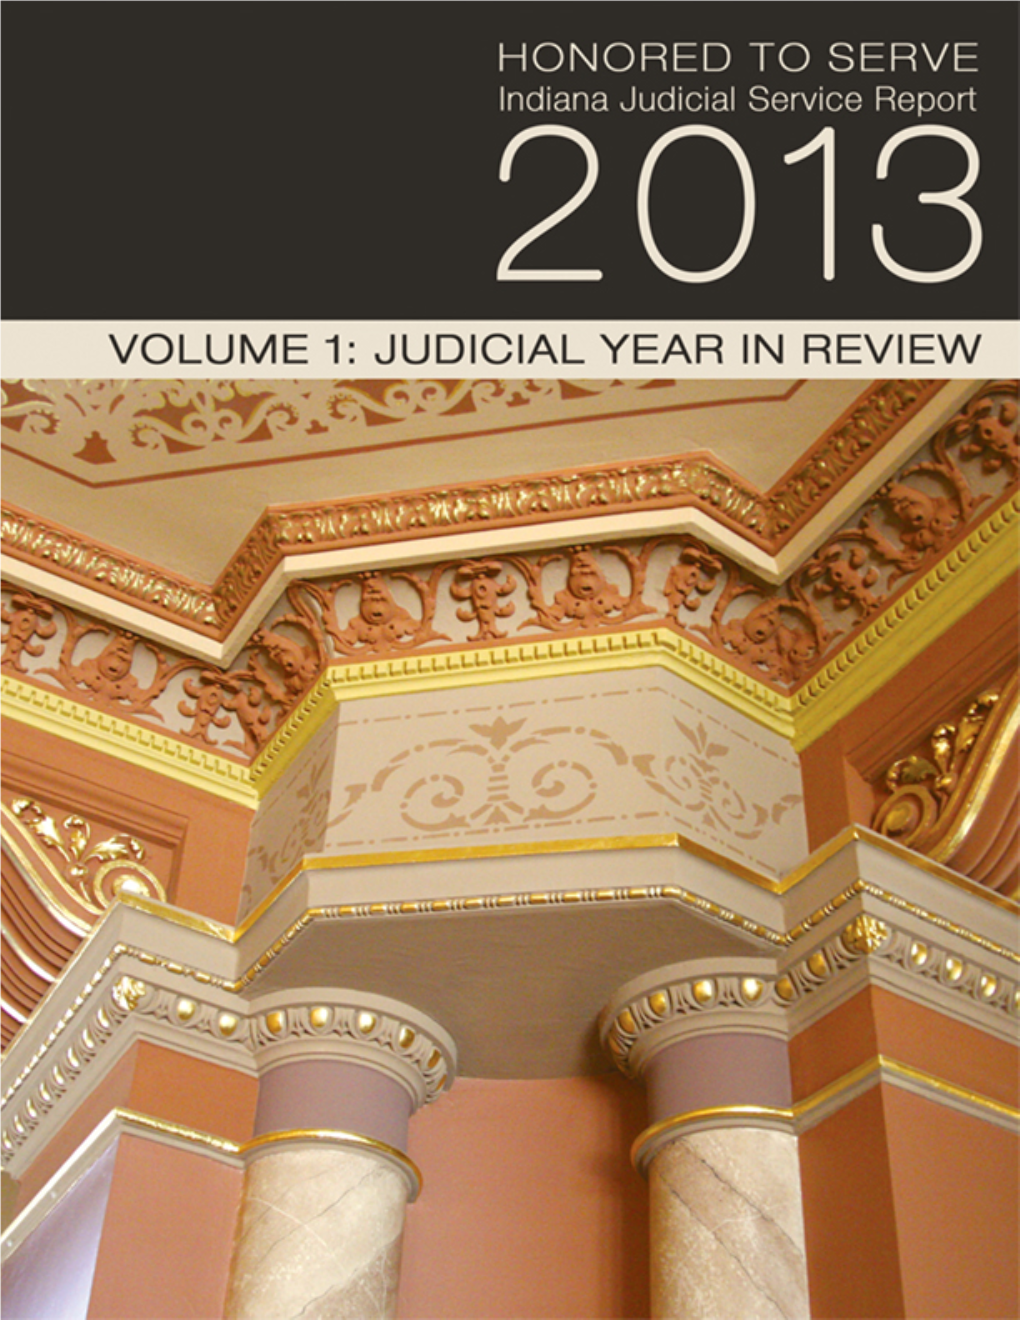 Judicial Year in Review | Iii on the COVER